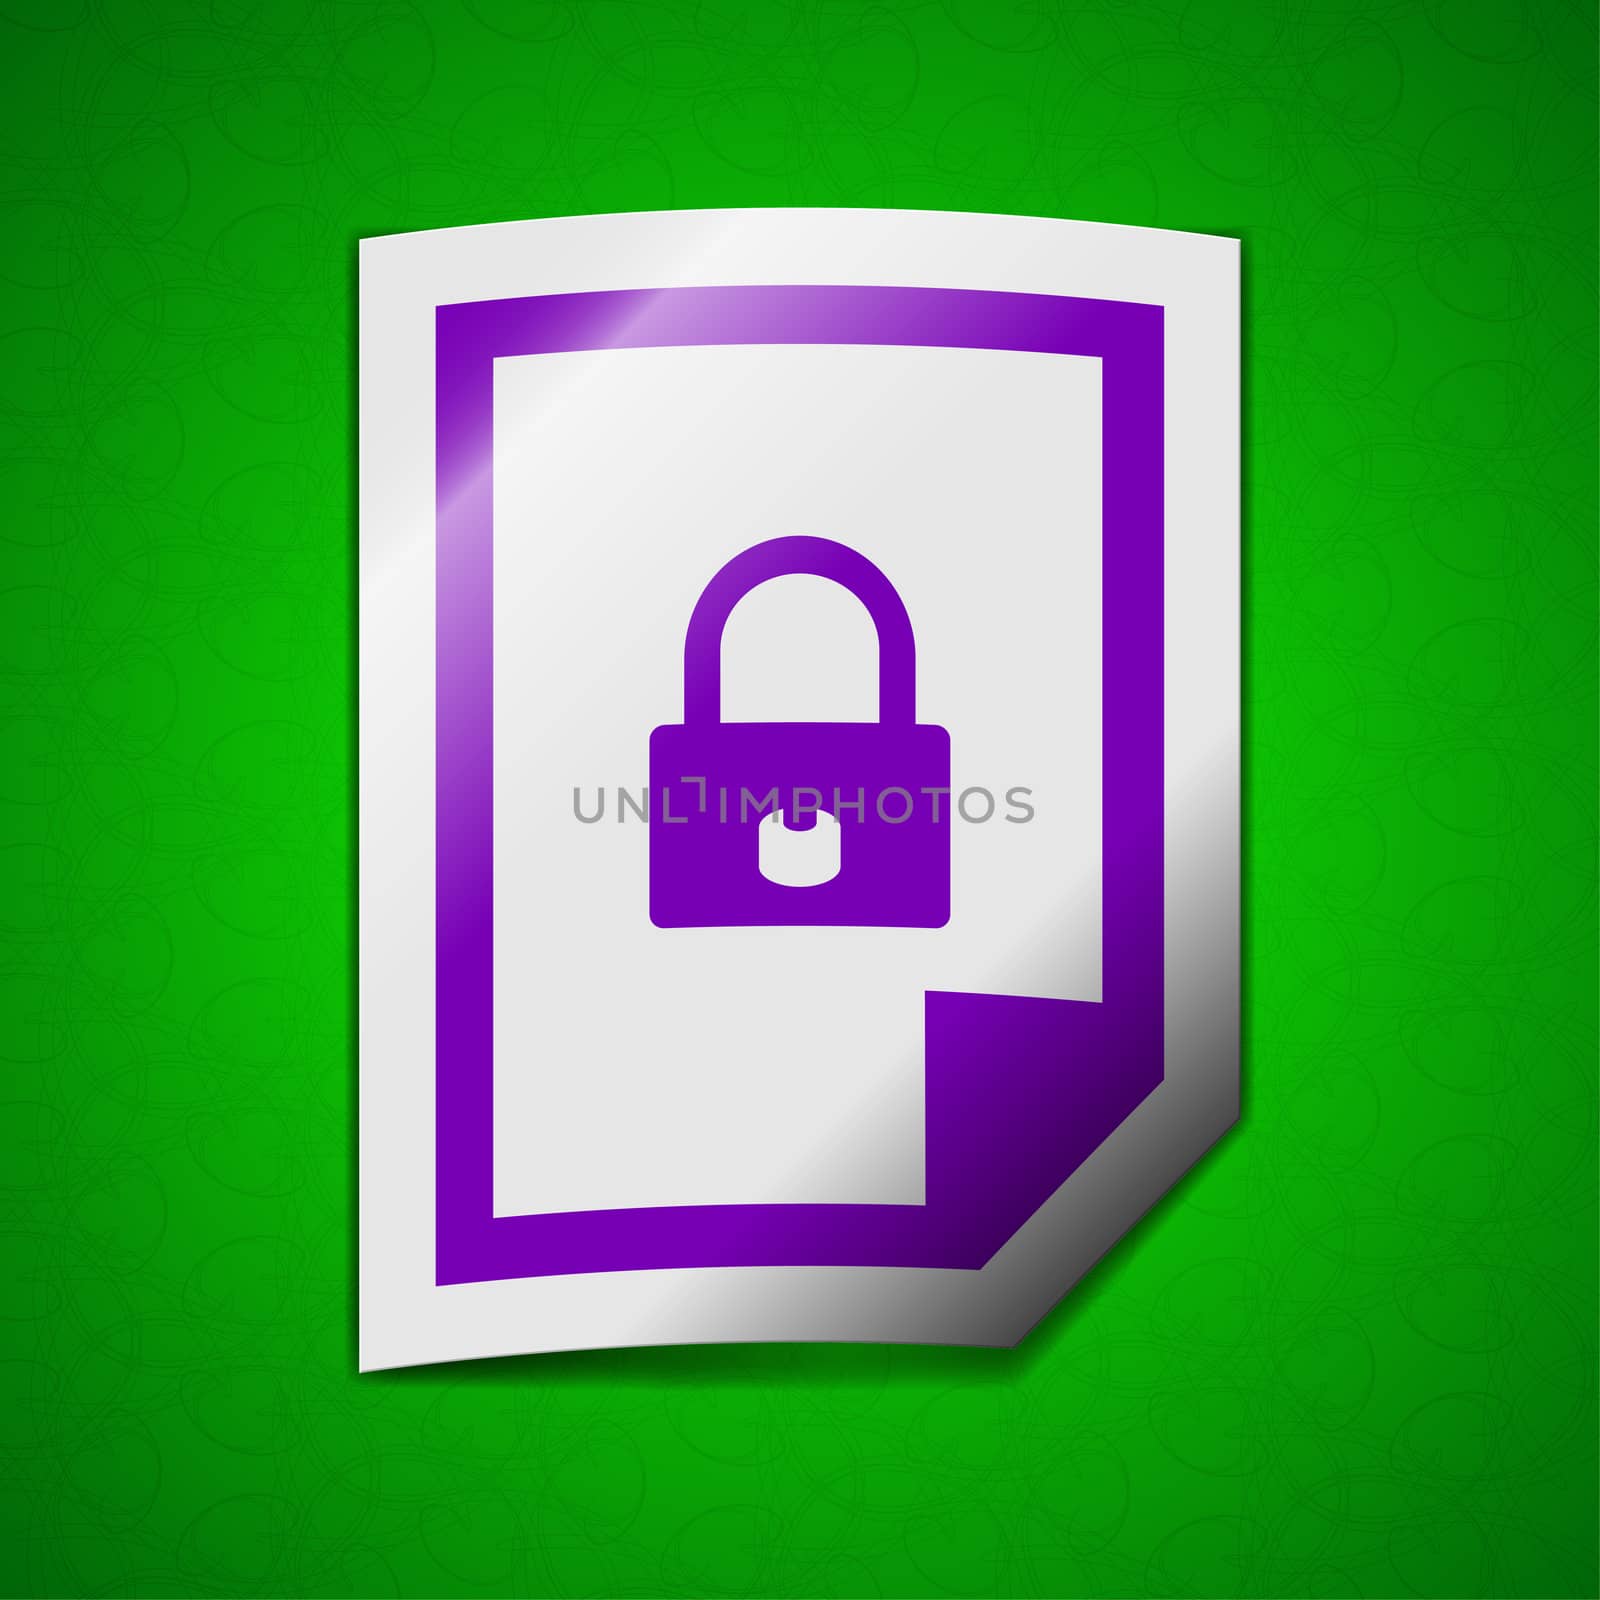 file locked icon sign. Symbol chic colored sticky label on green background.  illustration